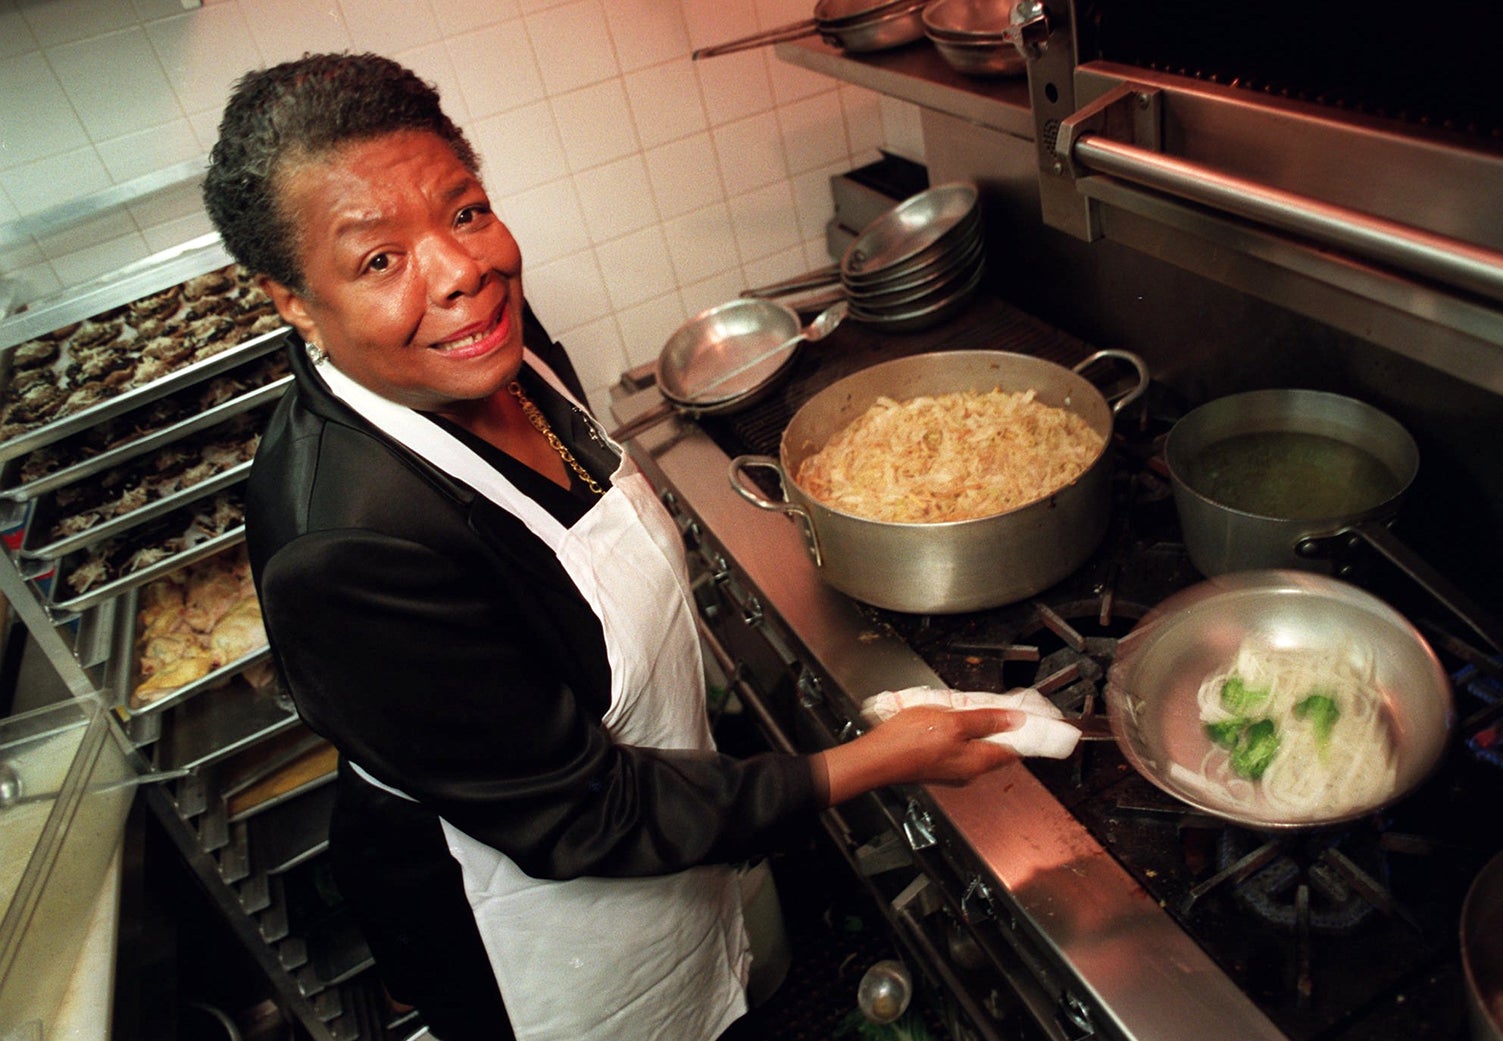 Dr. Maya Angelou’s Life In Pictures